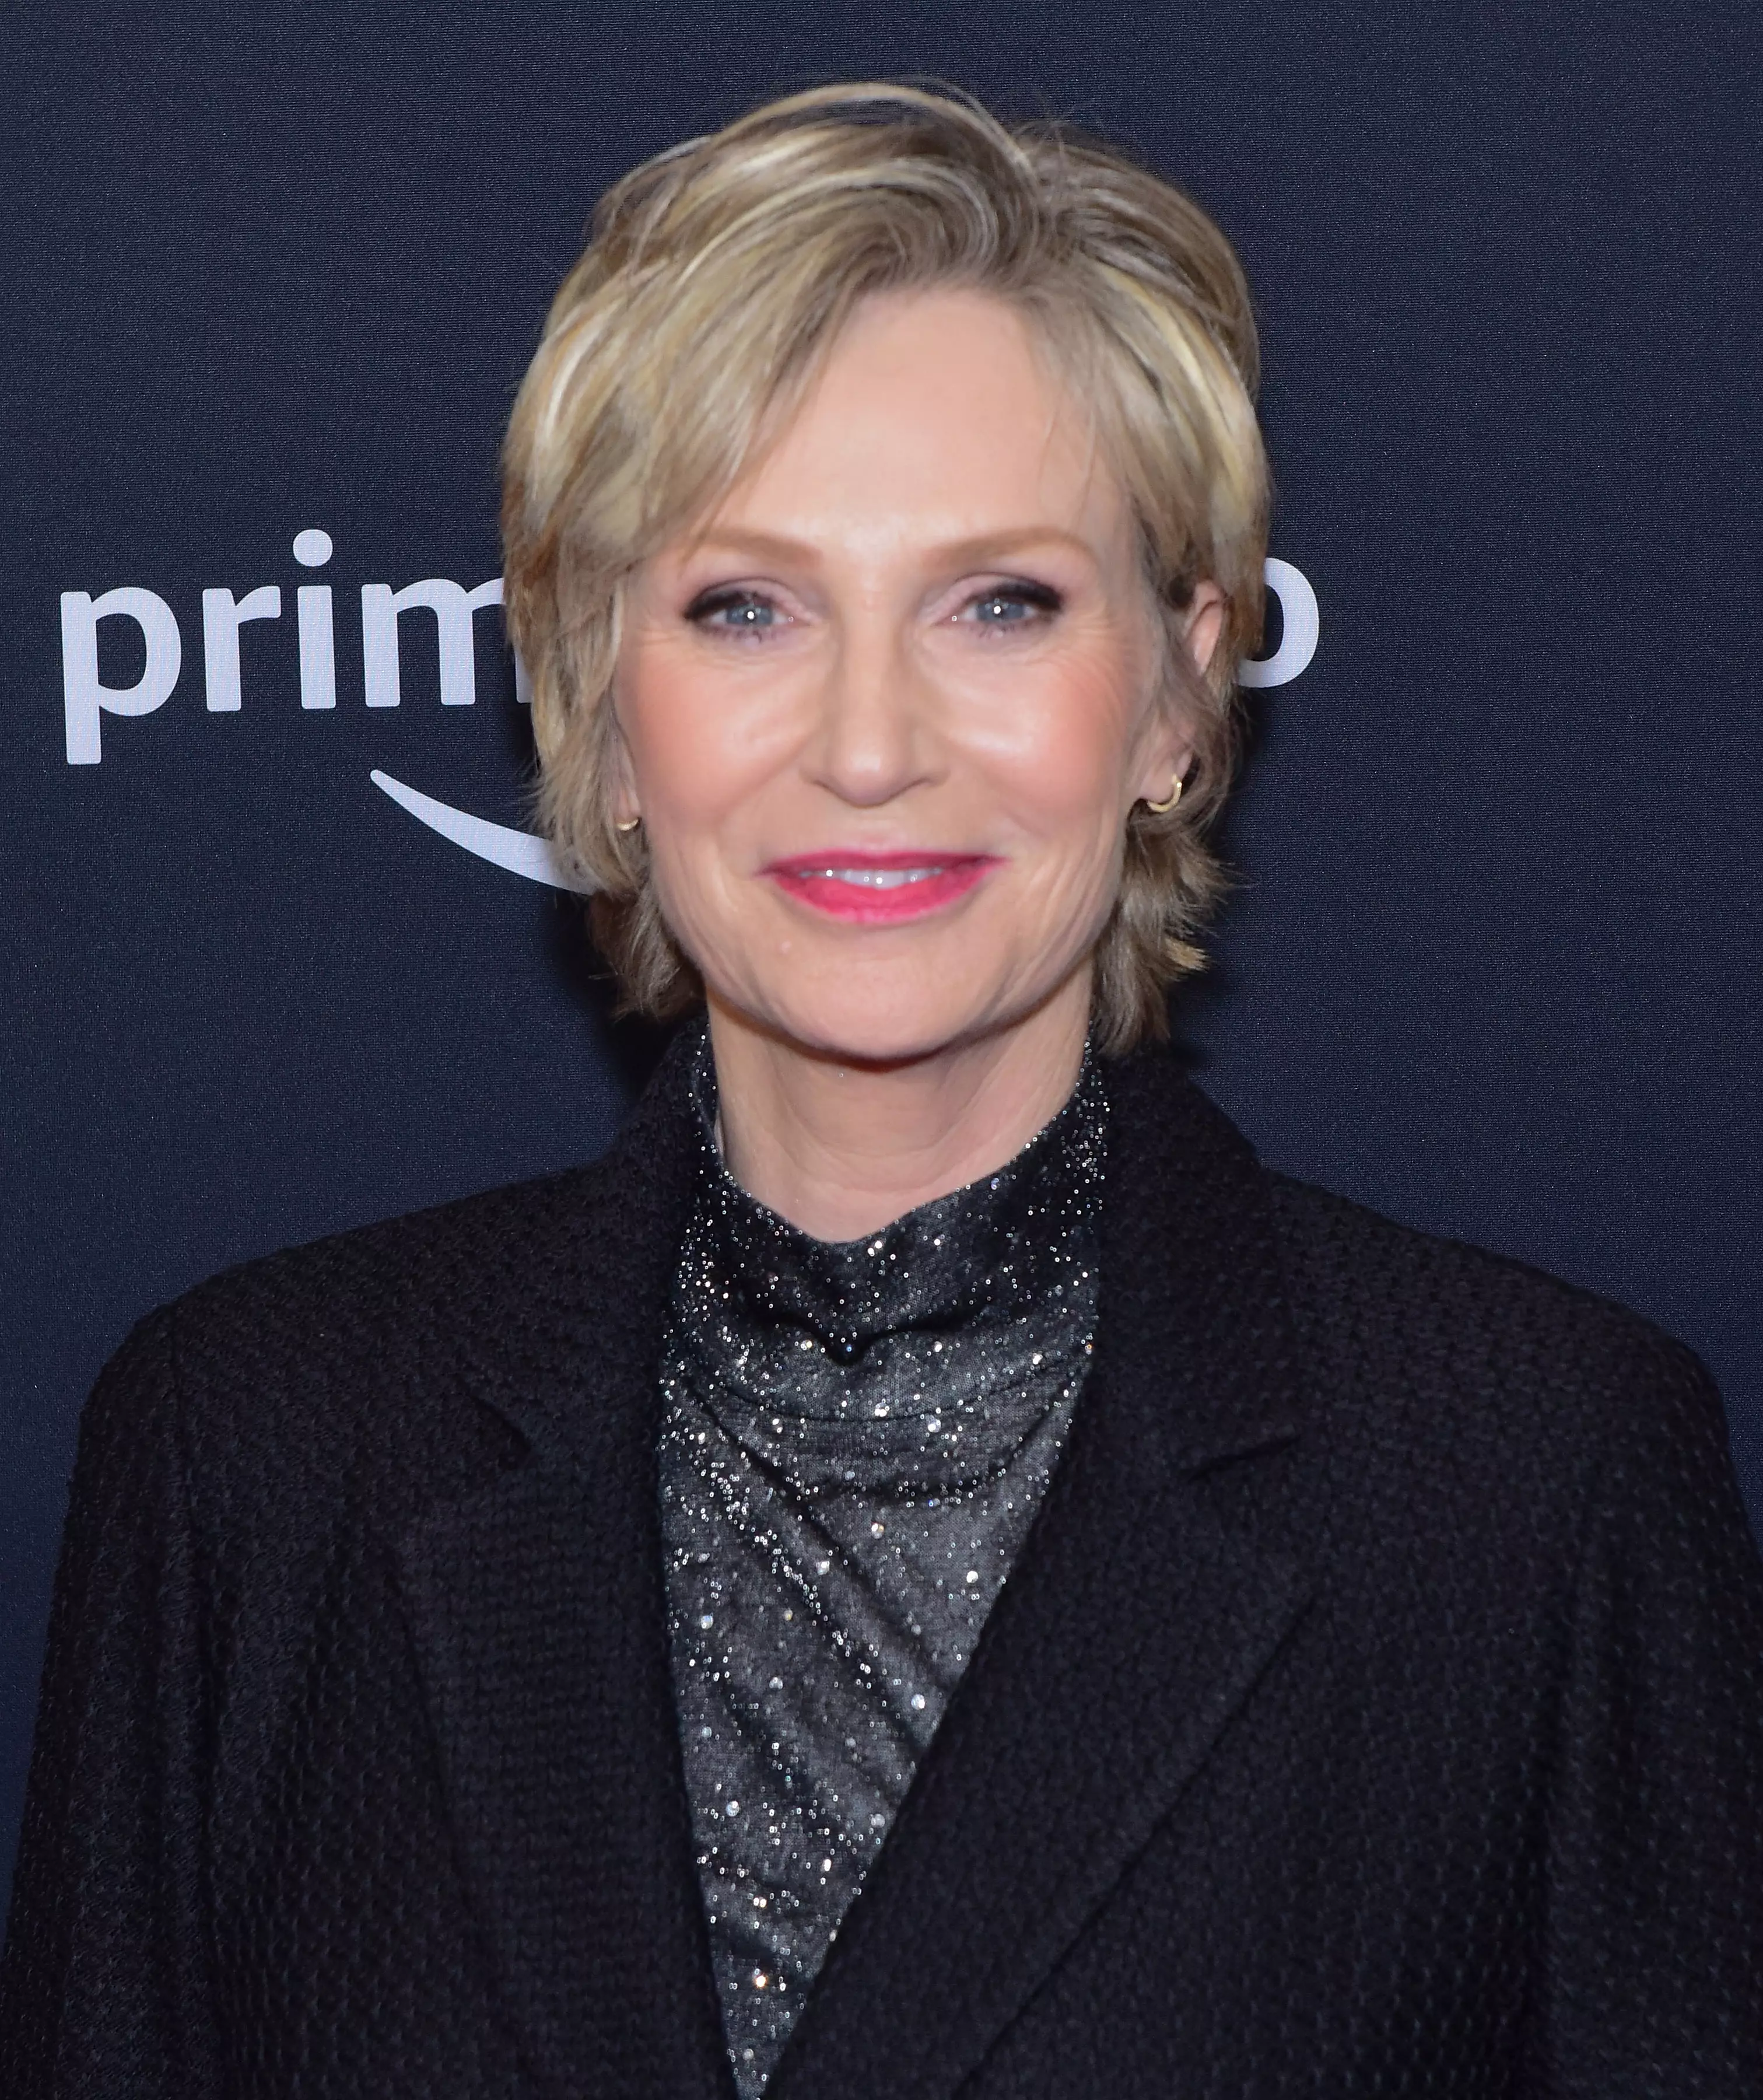 Jane Lynch will be saying those iconic words (